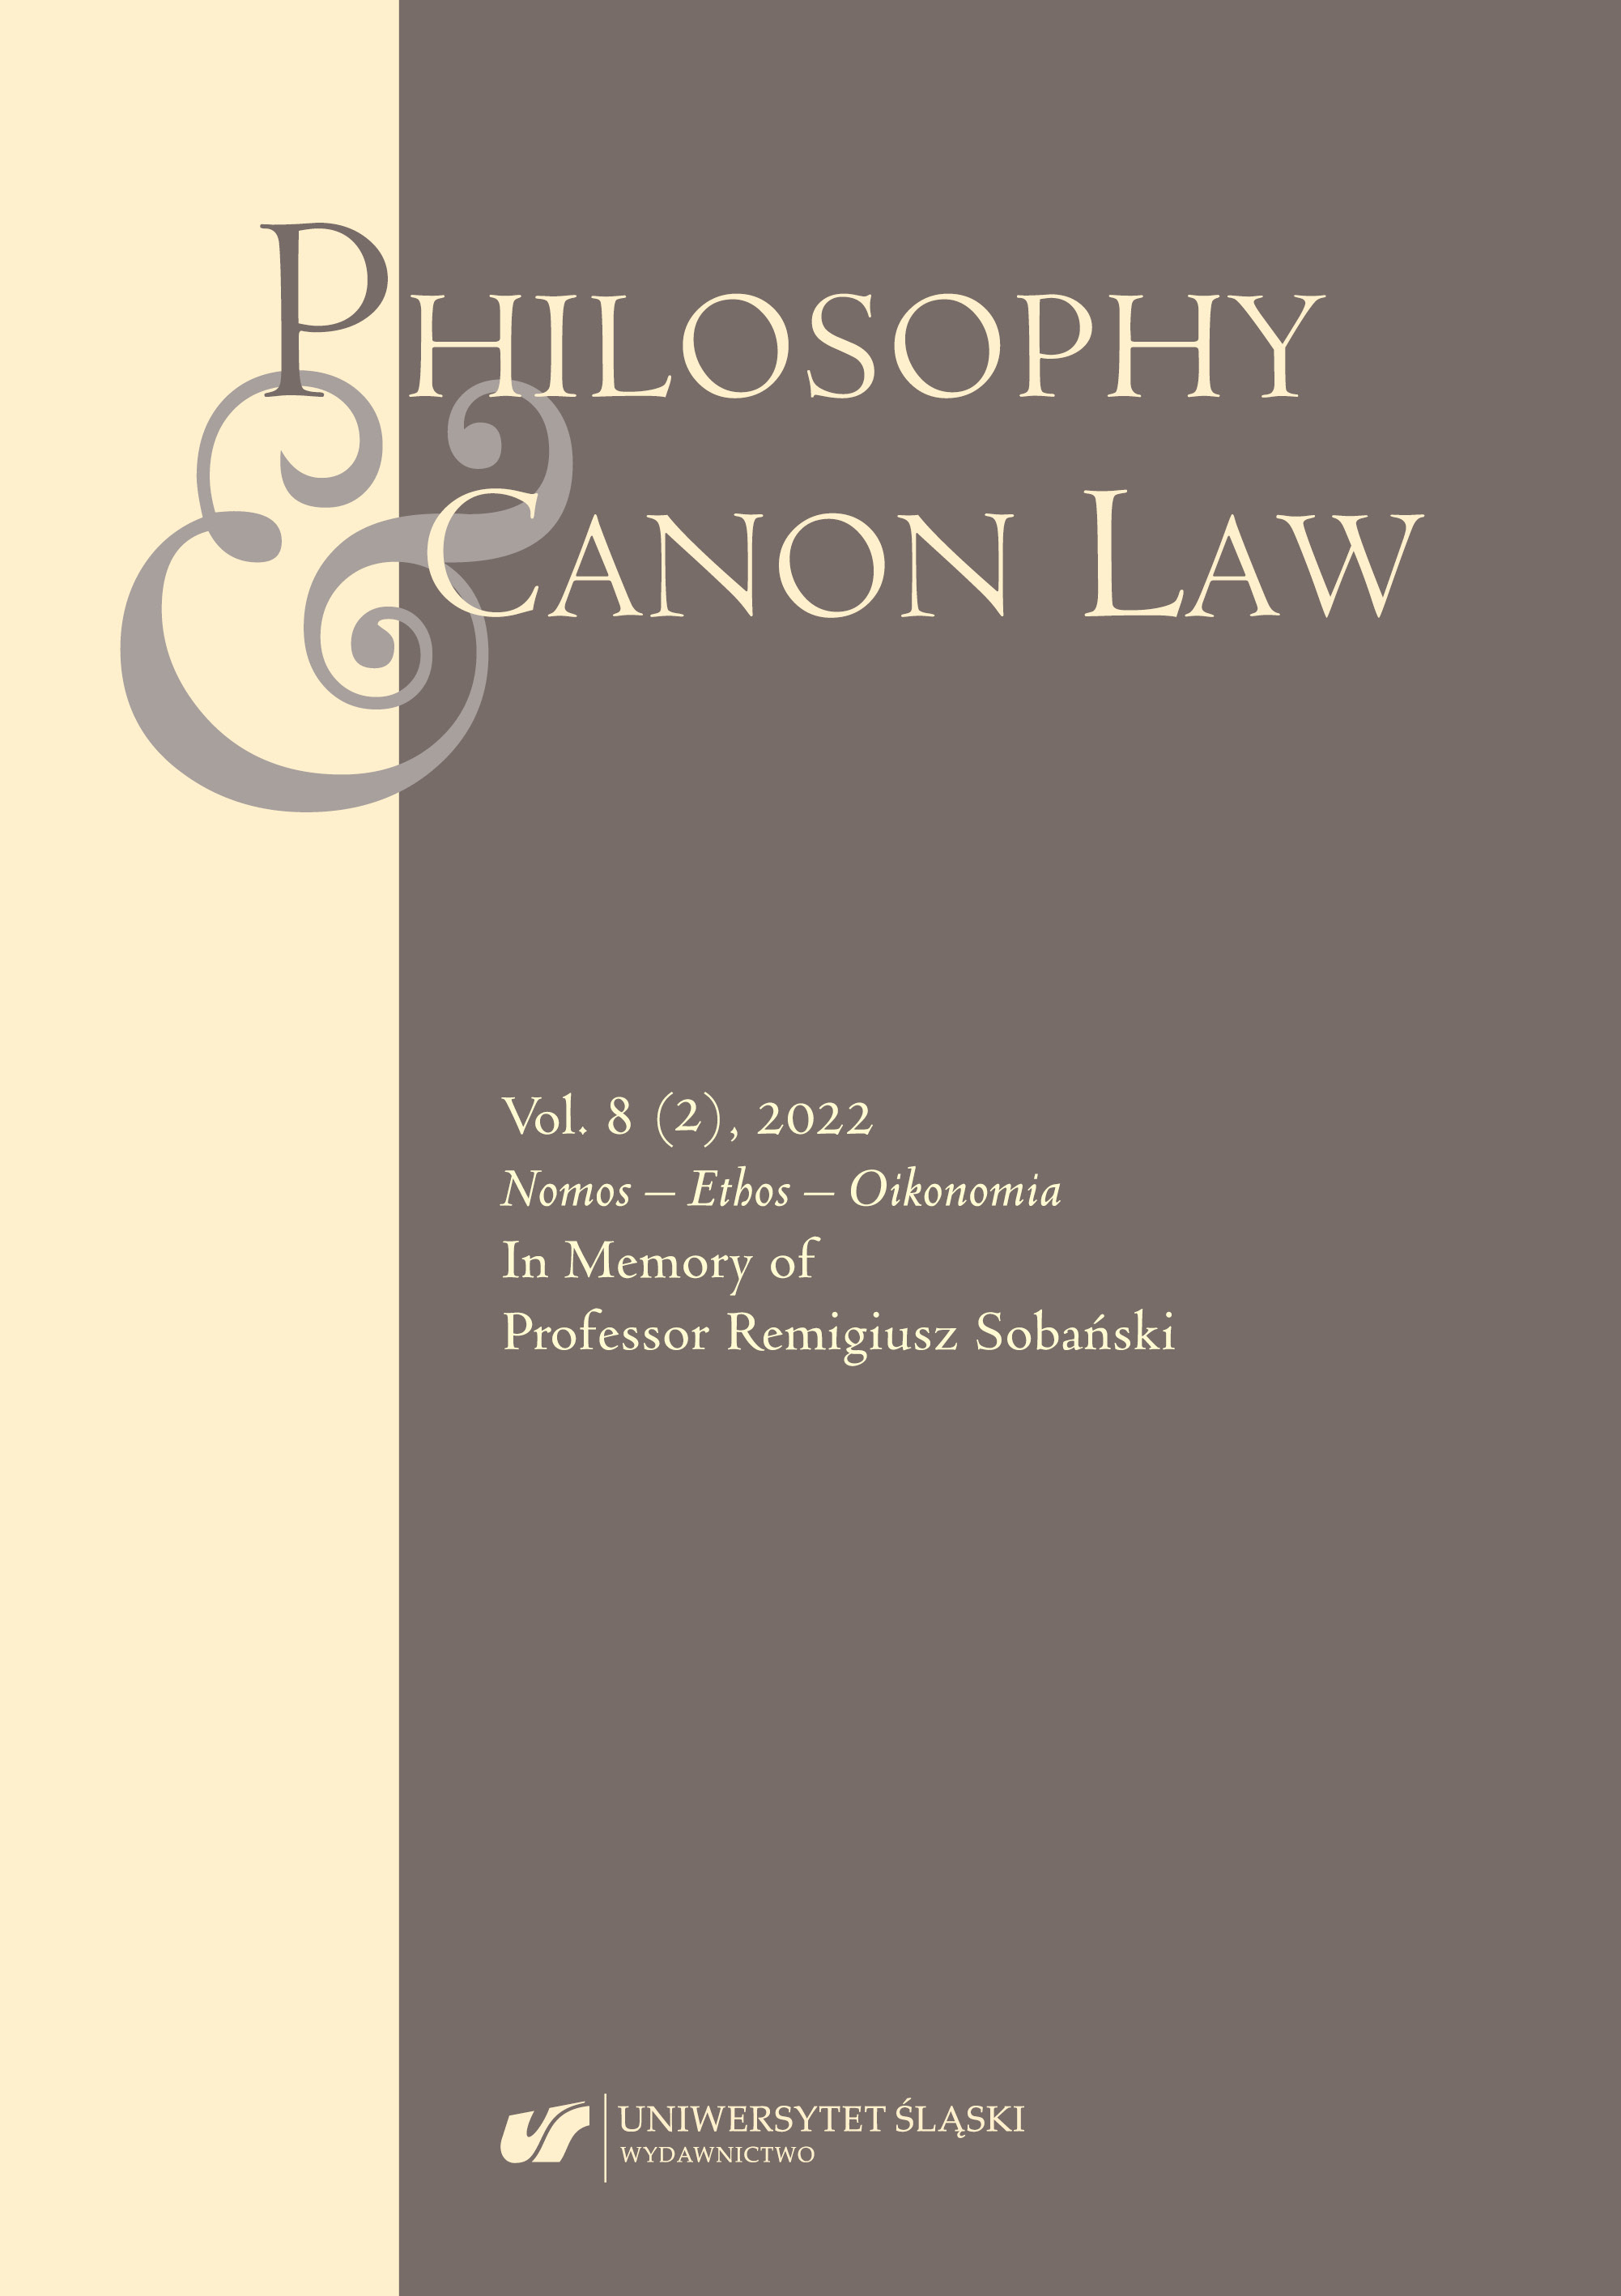 The Research Activity of Rev. Prof. Remigiusz Sobański in the Field of Substantive Canon Law